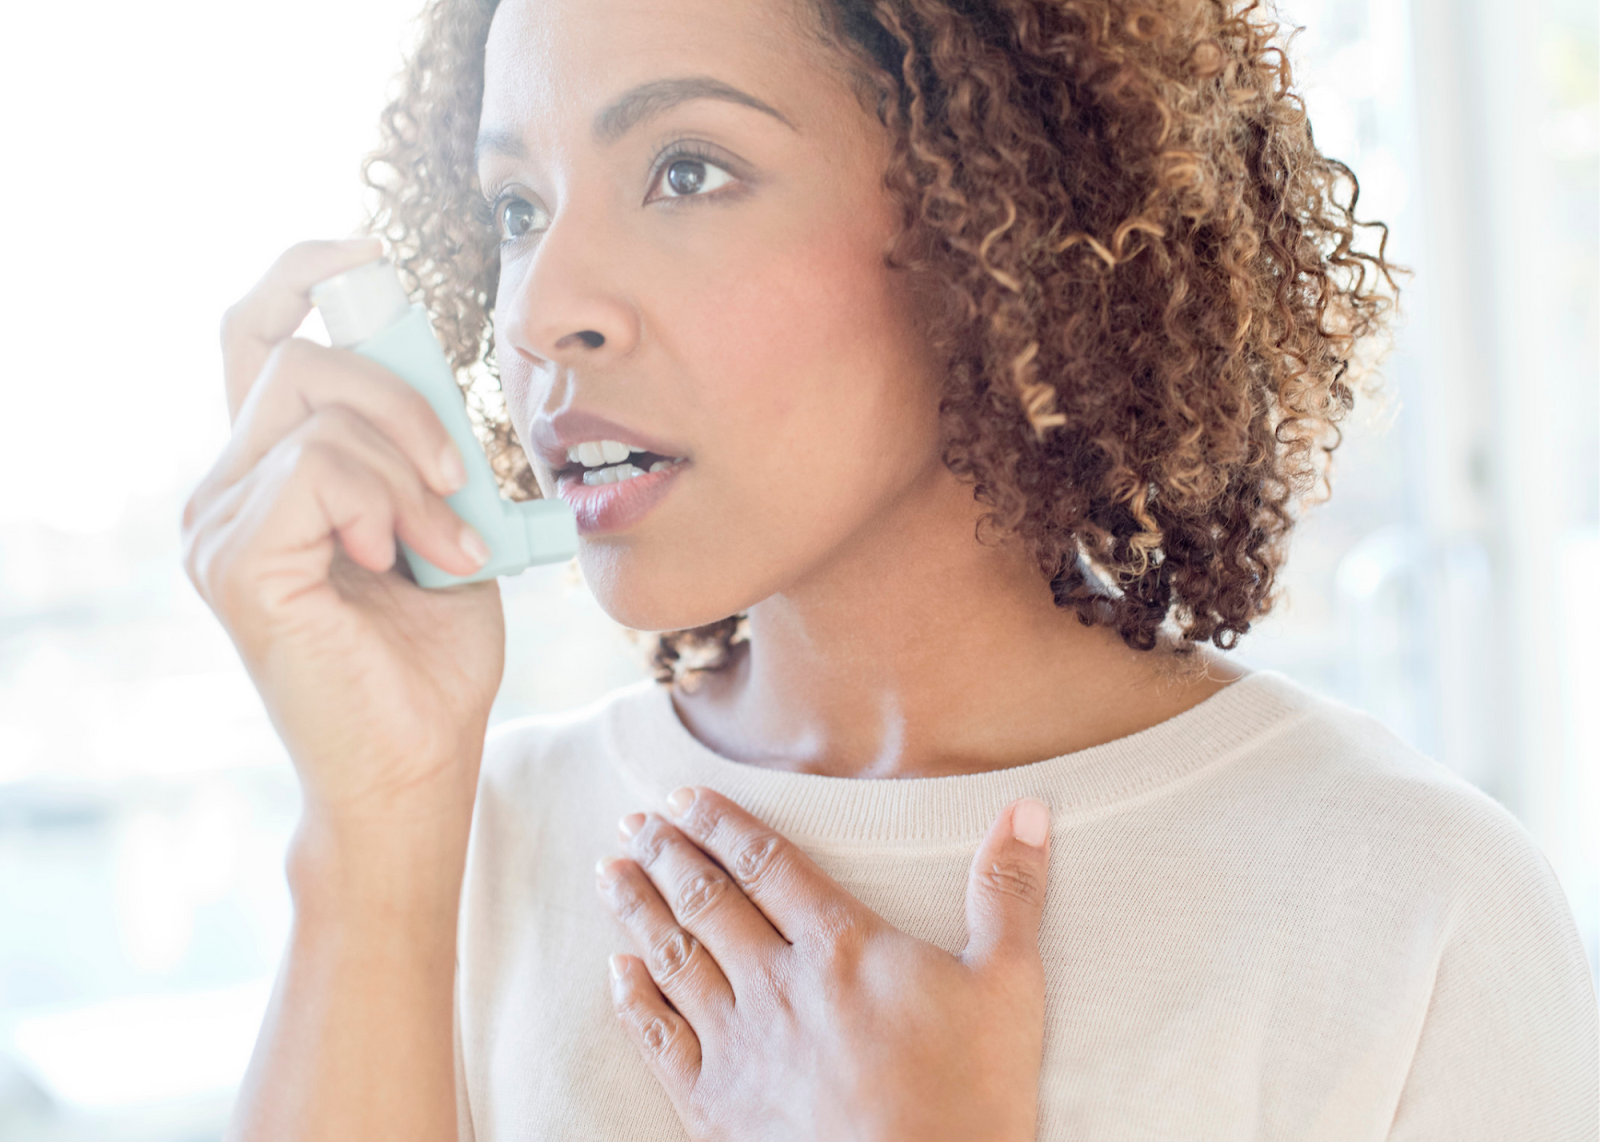 Woman with COPD in her 30s uses her inhaler while holding her other hand over her chest.